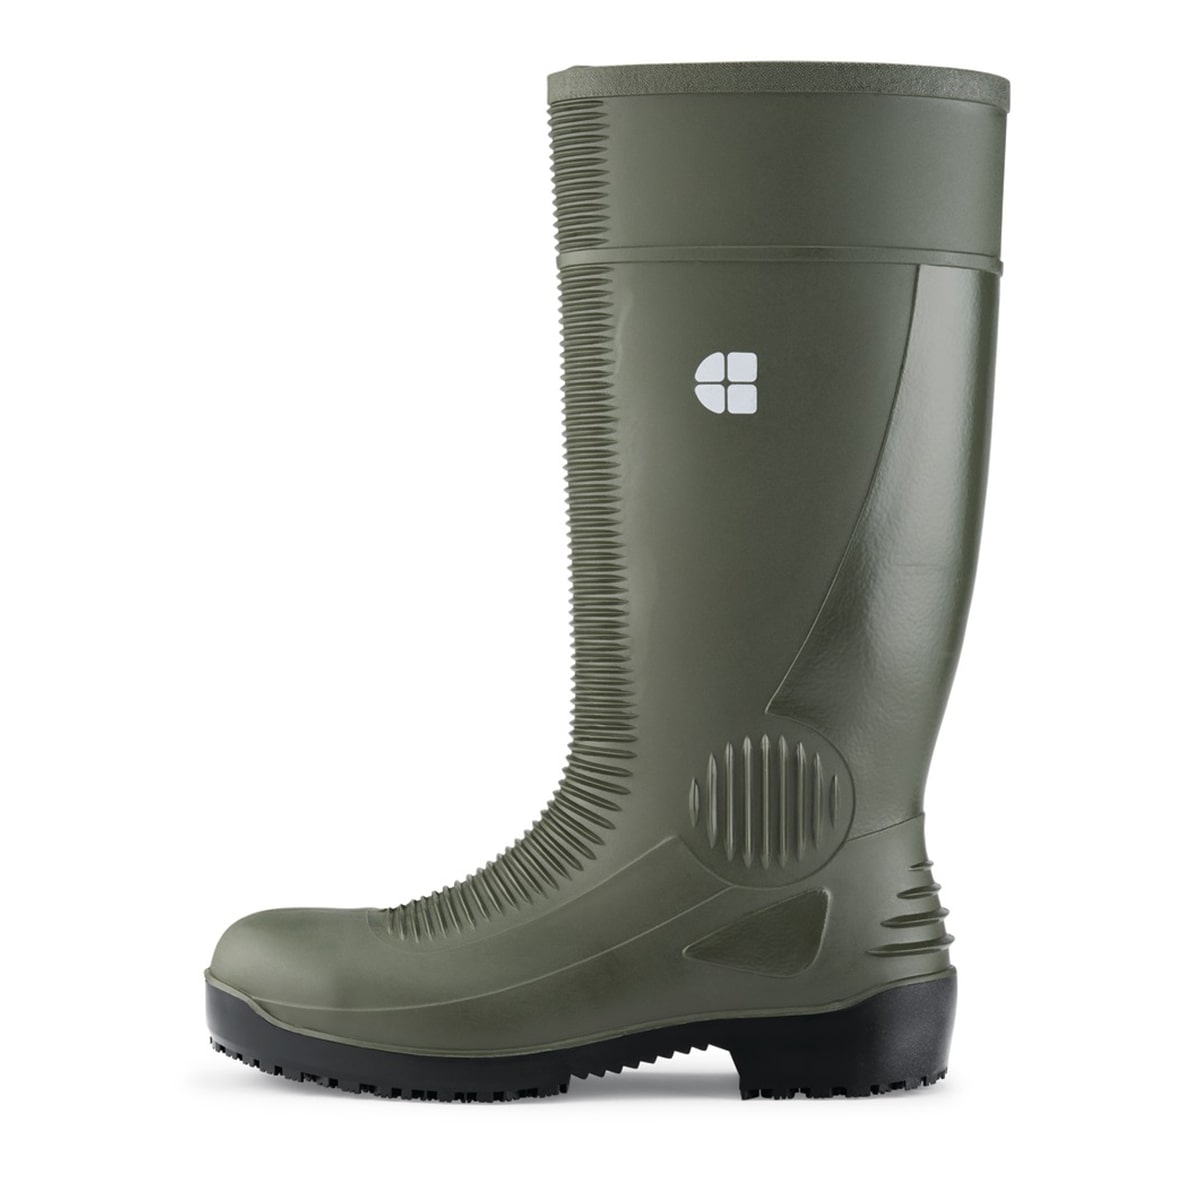 Slip resistant green wellington boot with steel toe cap (200 Joules) and water resistant upper, seen from the left.